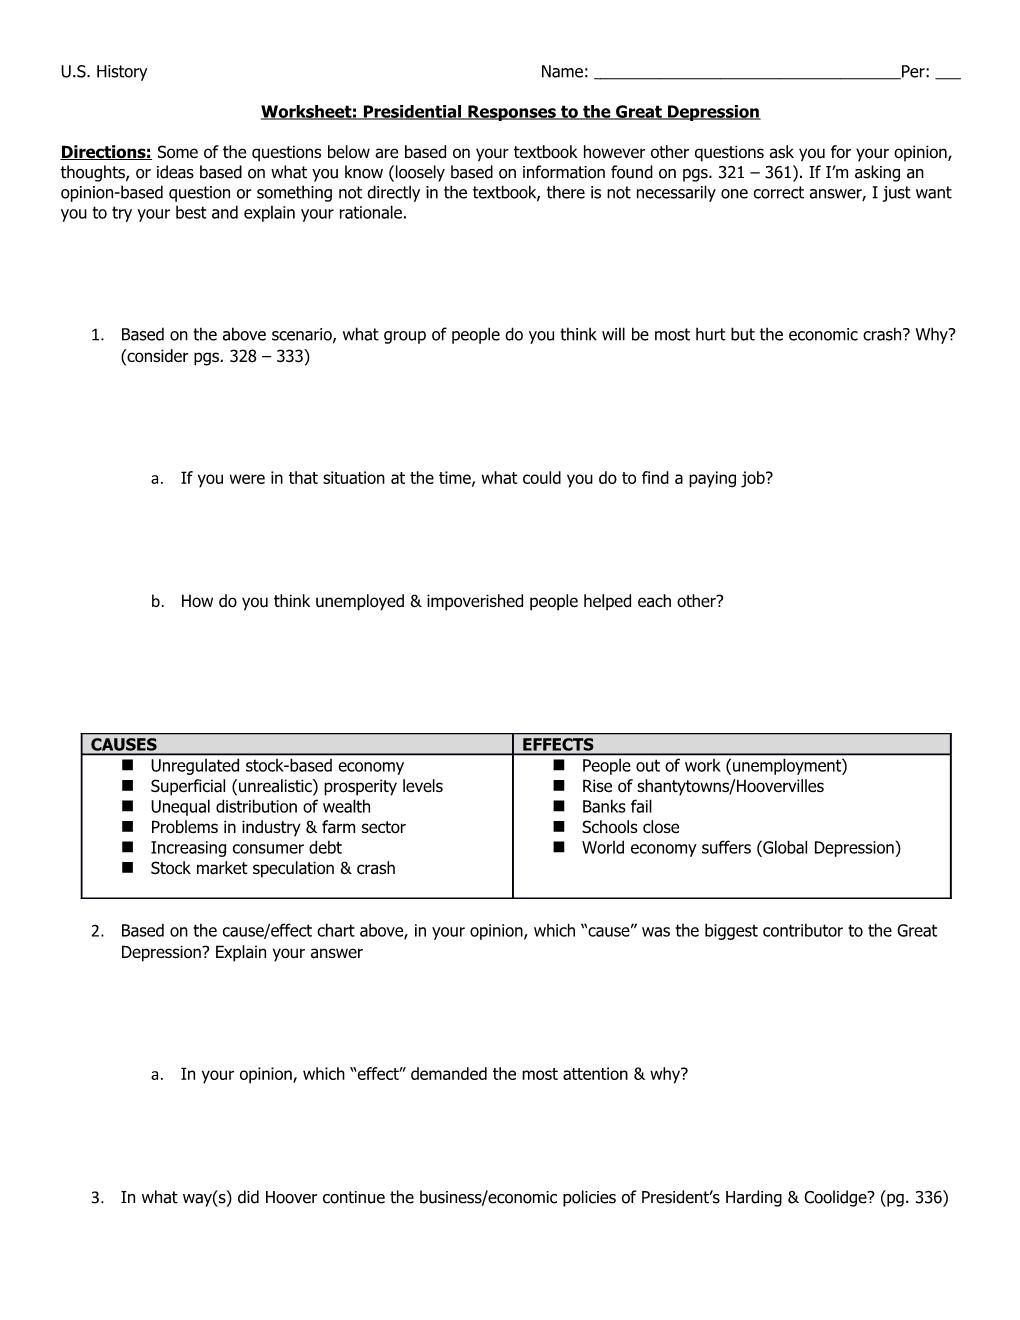 Worksheet: Presidential Responses to the Great Depression